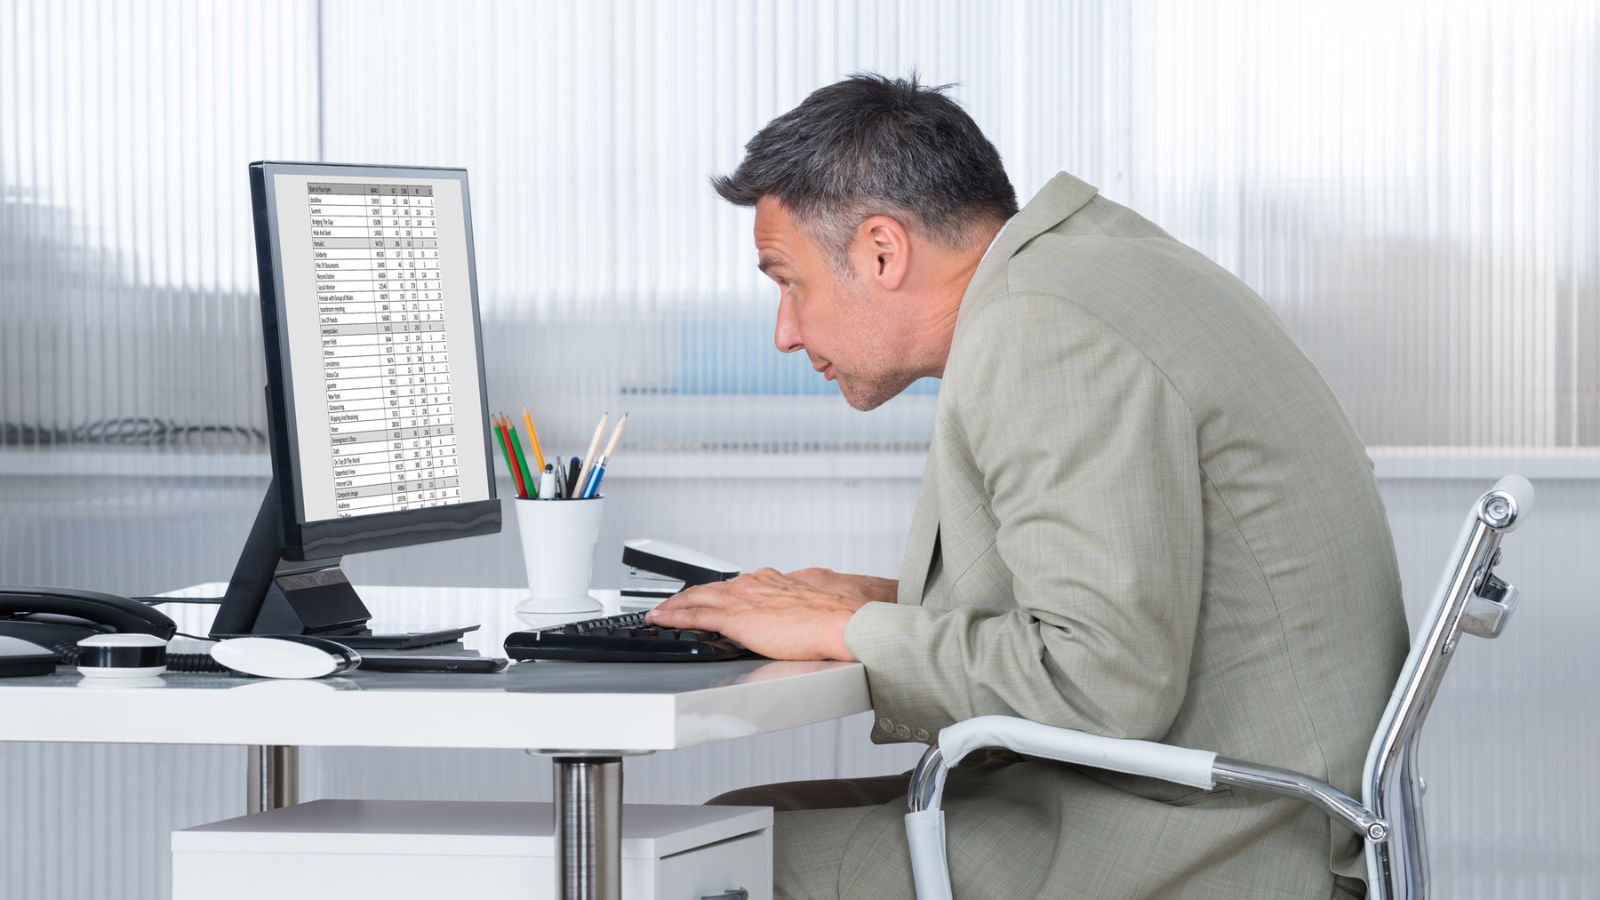 businessman working at a desk with bad posture